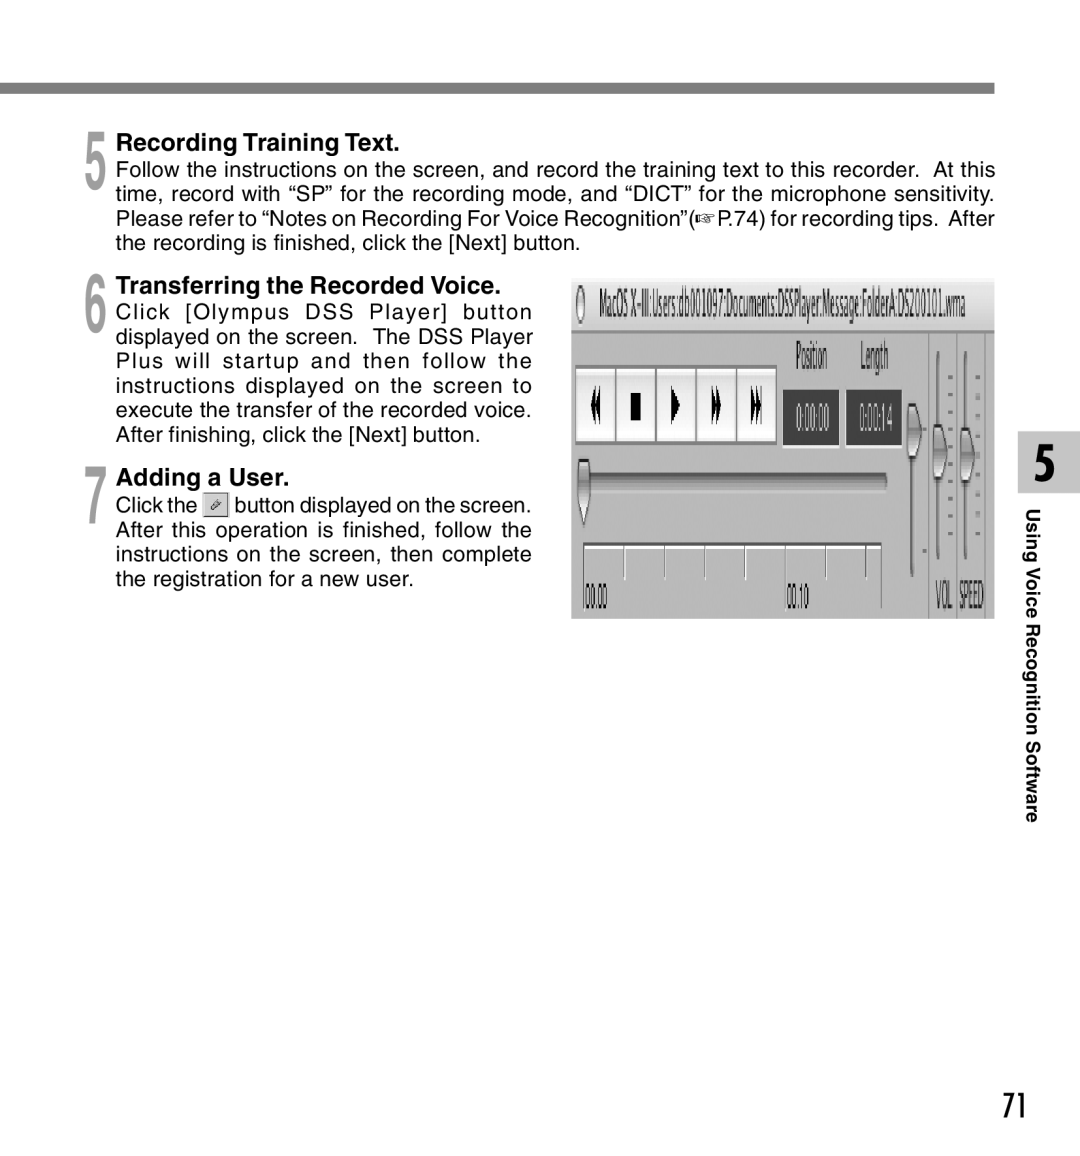 Olympus DS-2300 manual Recording Training Text 